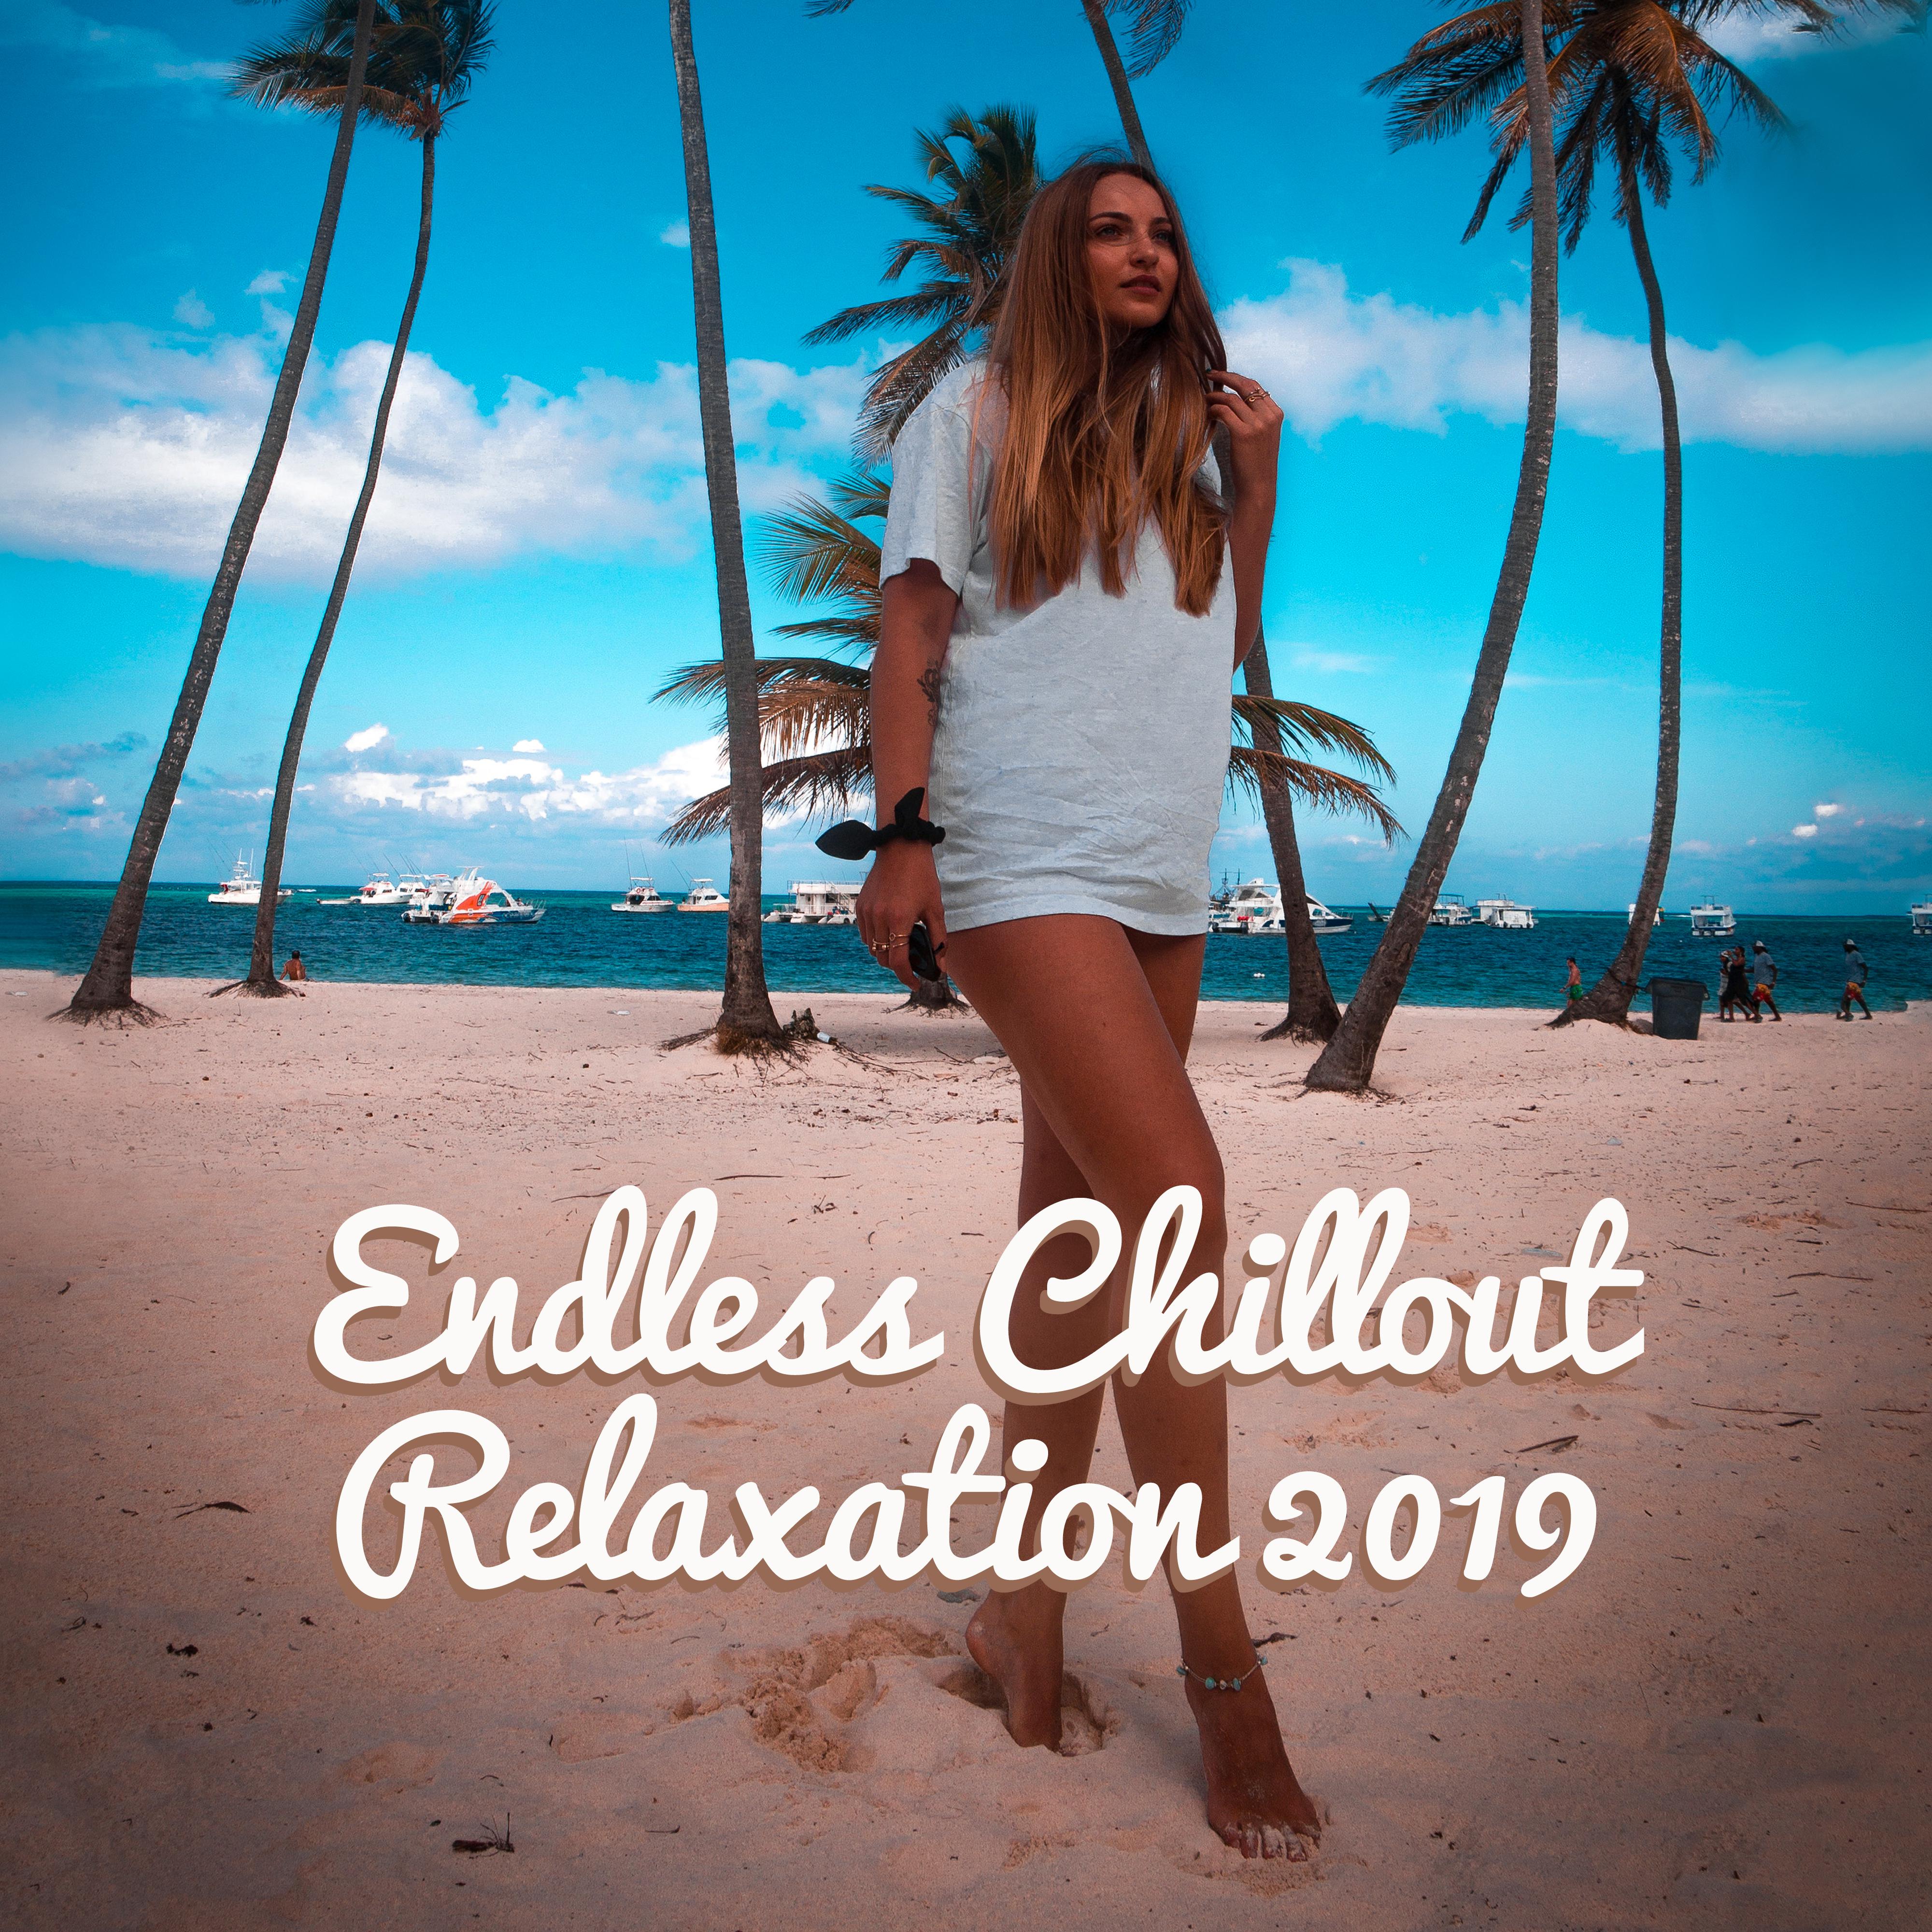 Endless Chillout Relaxation 2019: Compilation of Best Chill Out Soft Vibes to Complete Relax, Stress Reducing Melodies, Calming Down Sounds